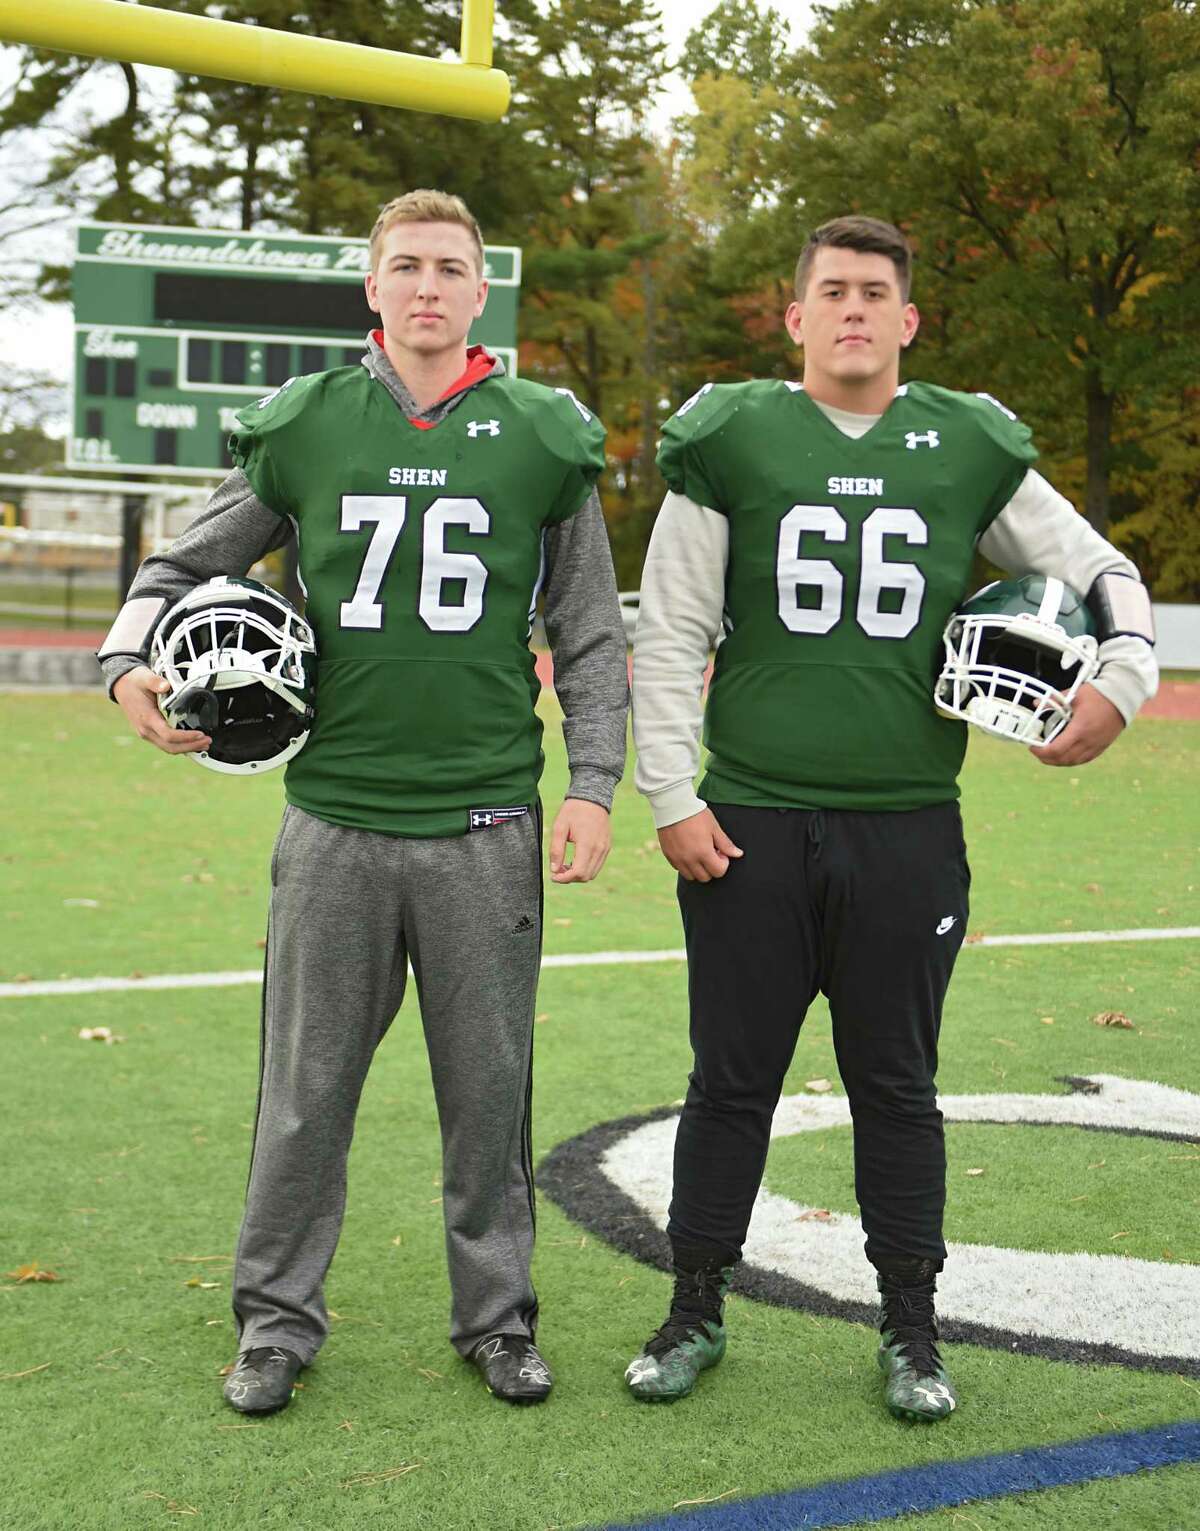 Shenendehowa lineman Andy Weyrauch, left, and Dylan Blowers at football practice on Thursday, Oct. 25, 2018 in Clifton Park, N.Y. (Lori Van Buren/Times Union)